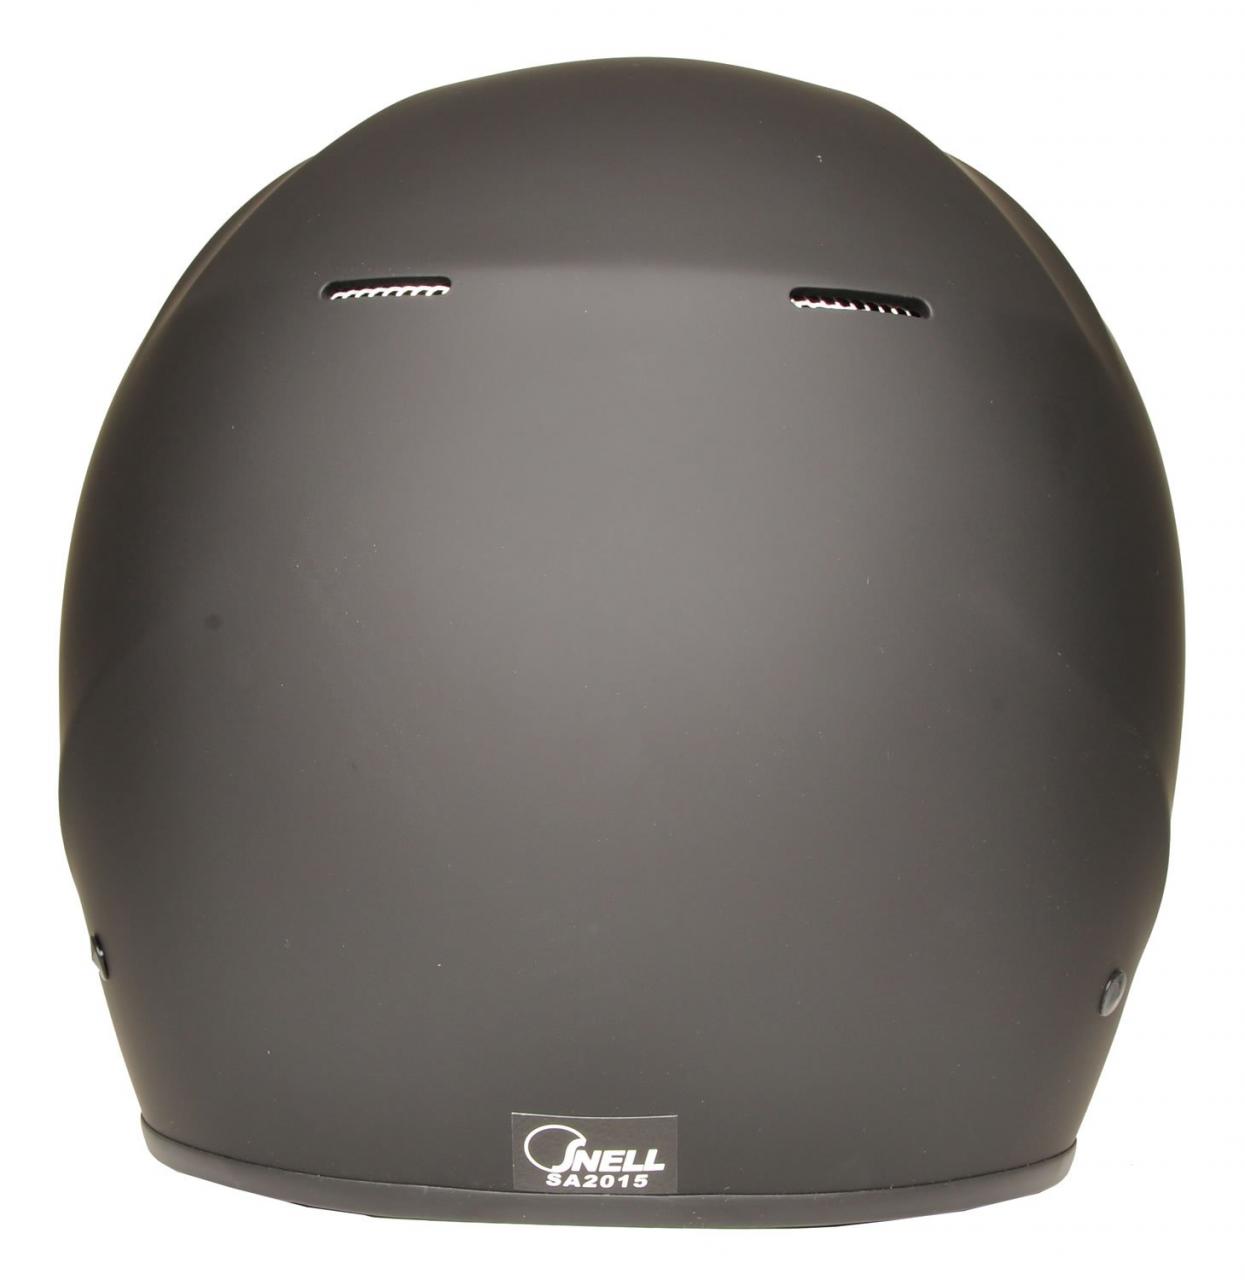 Conquer Snell SA2015 Certified Auto Racing Helmets – RoadBikeOutlet